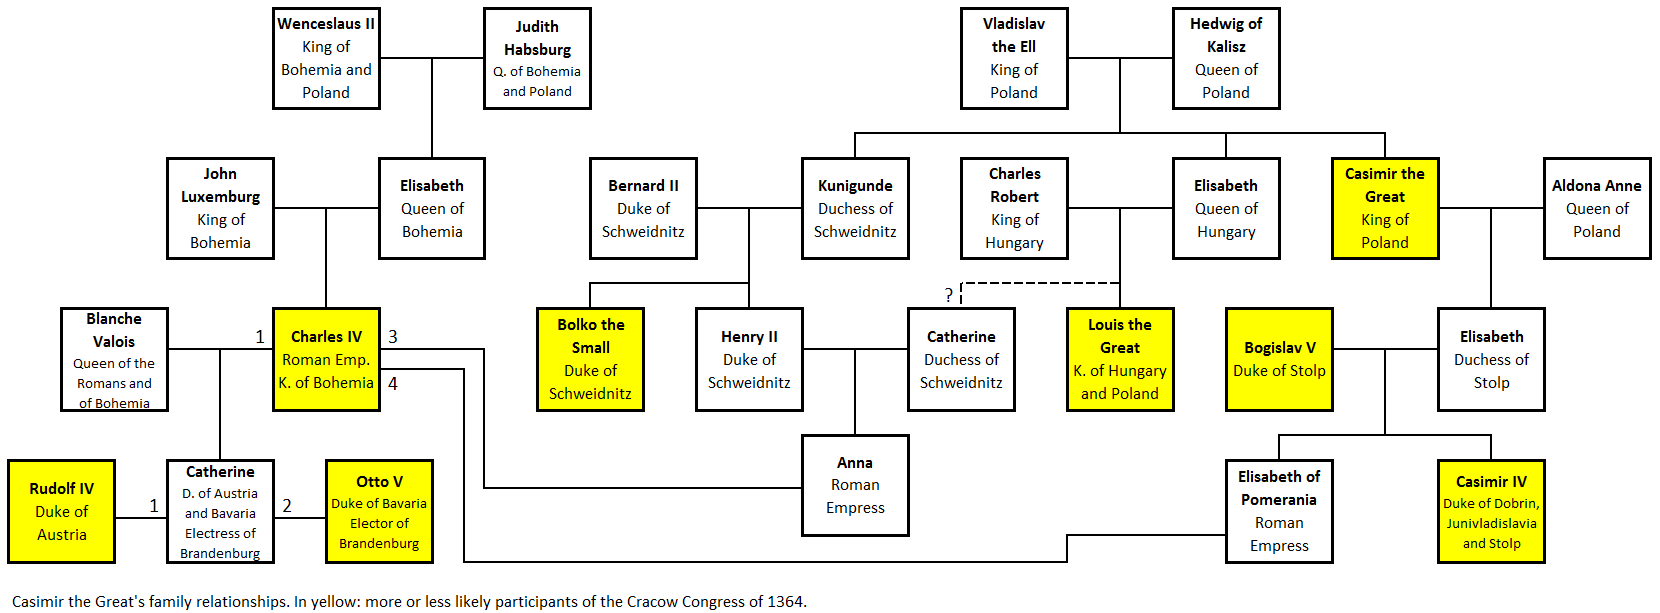 Casimir the Great's family relationship. In yellow: more or less likely participants of the Cracow Congress of 1364.